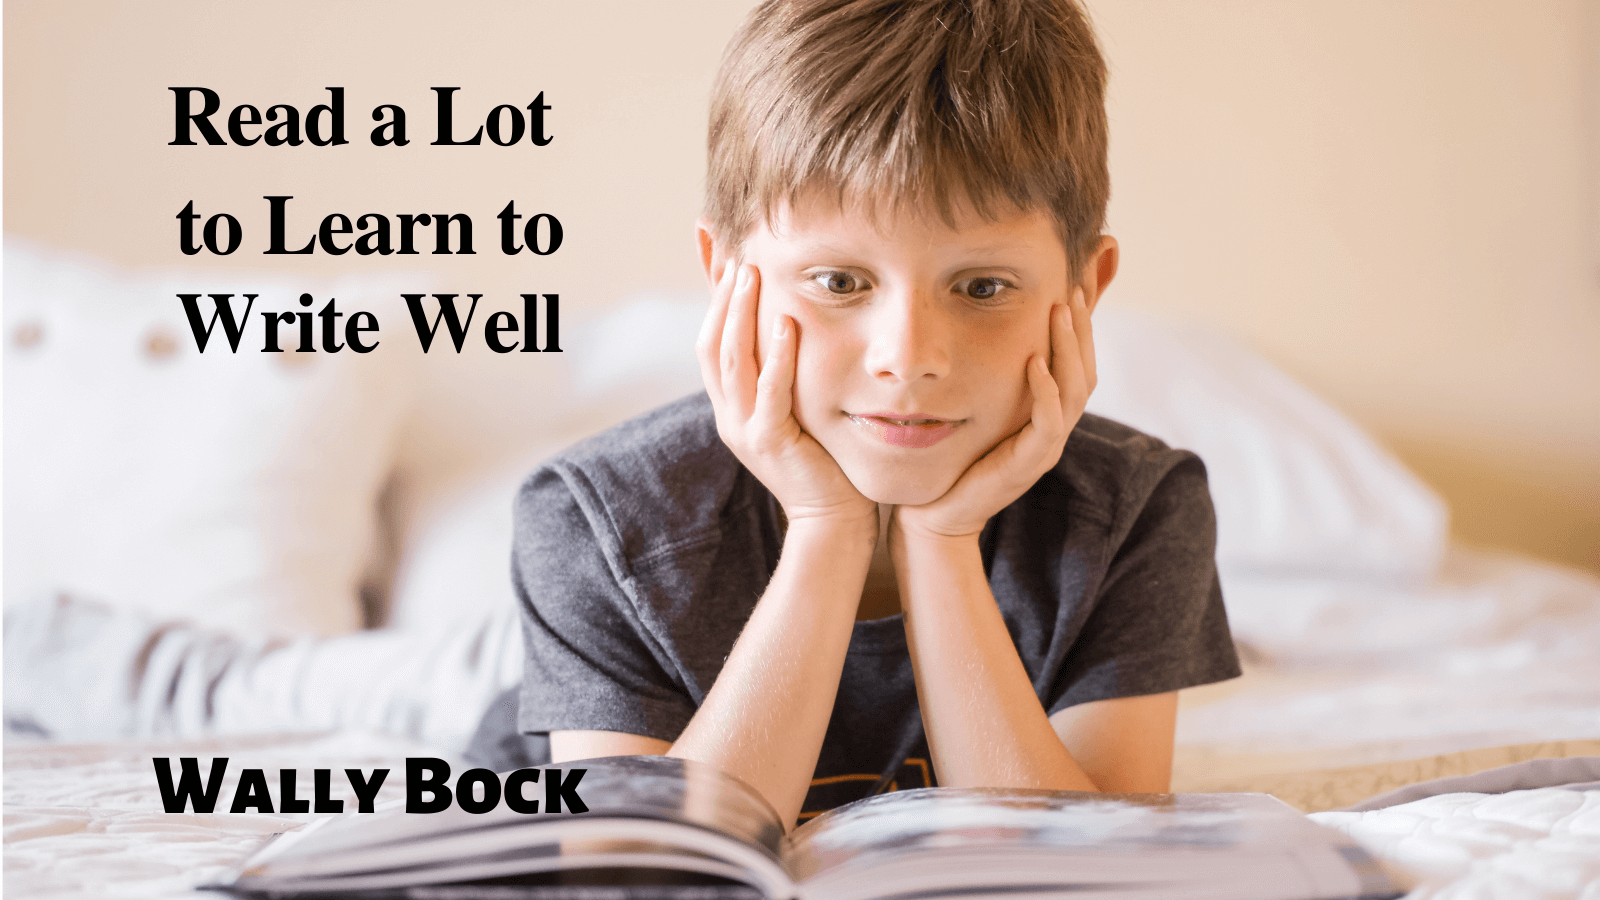 Read a Lot to Learn to Write Well